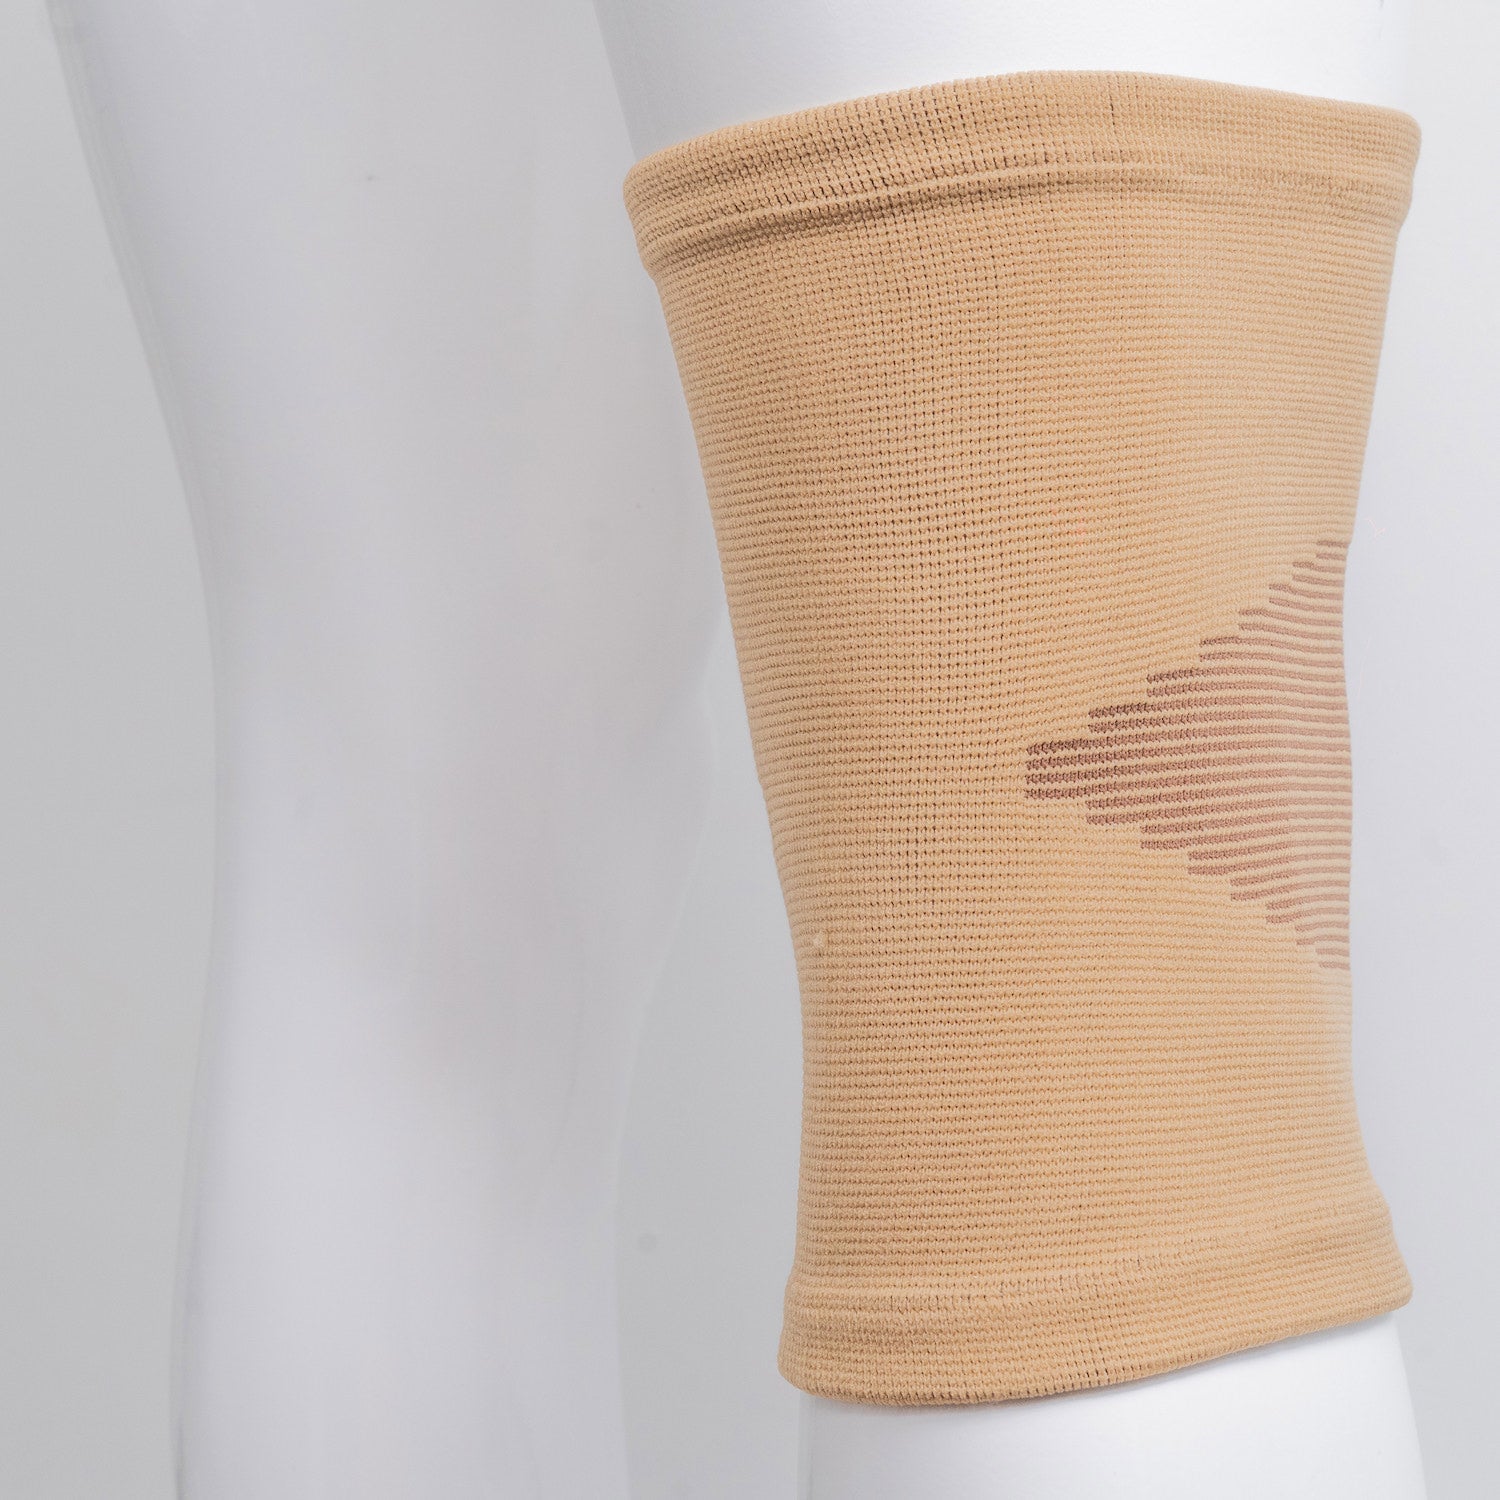 RS Knee Support 221